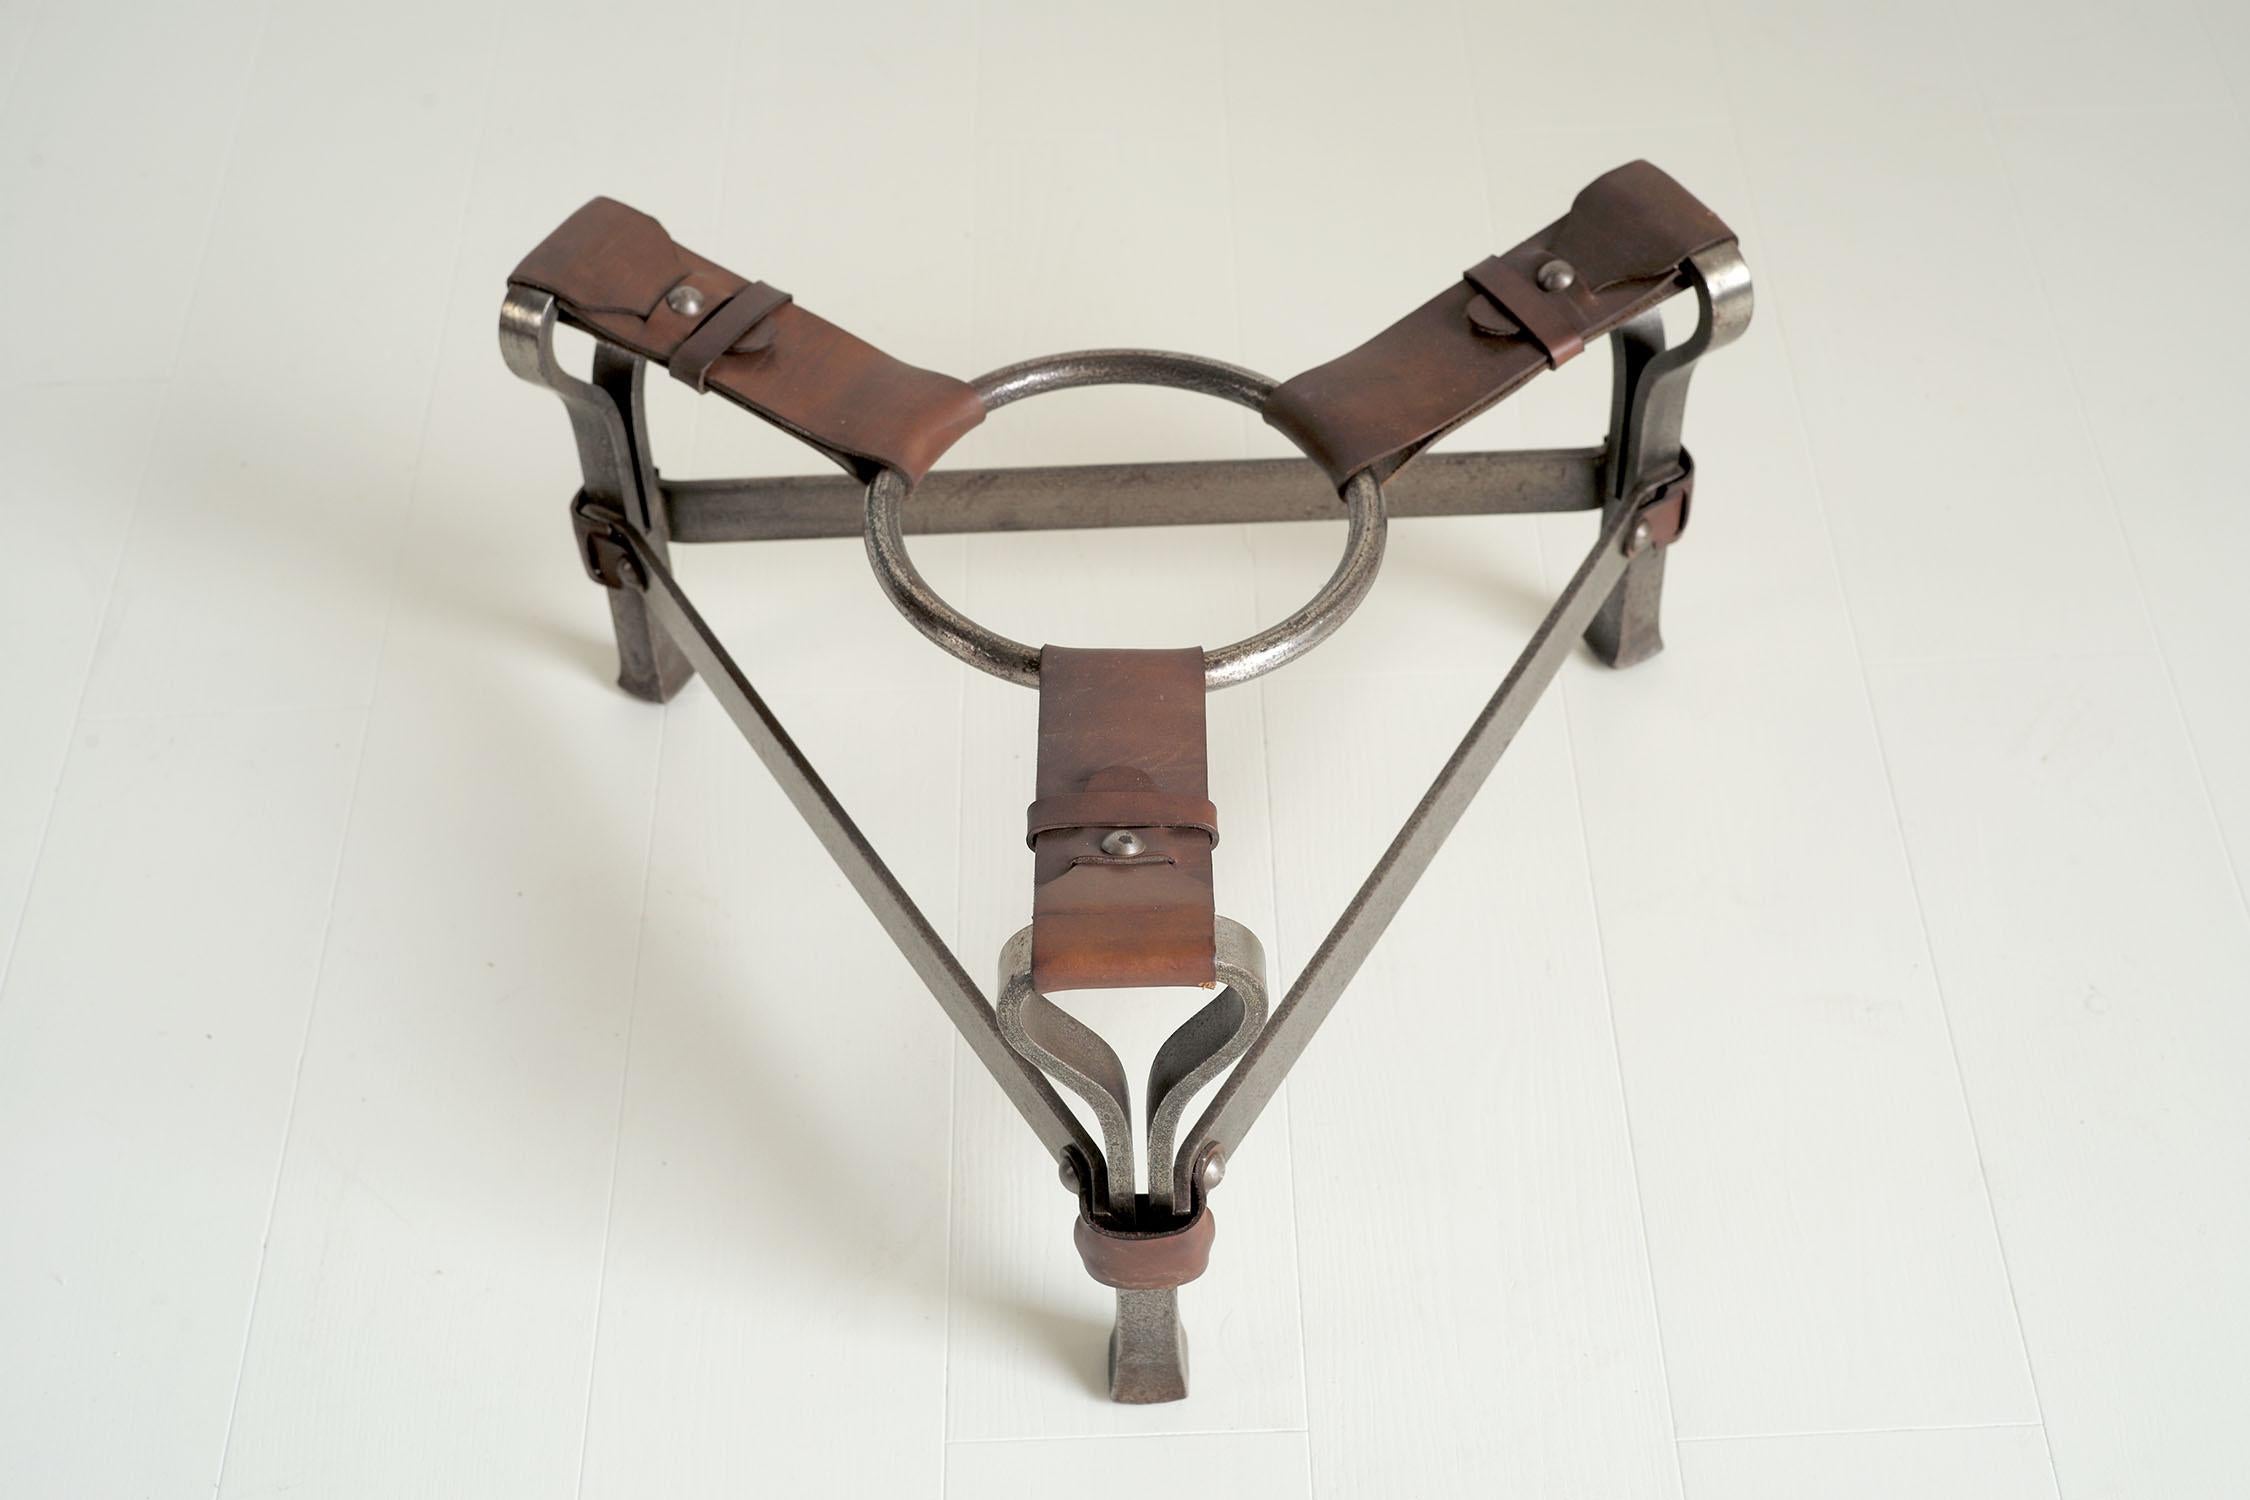 Jean-Pierre Ryckaert, wrought iron and leather coffee table base, France 1950. Tripod-shaped, this creation combines heavy-section wrought iron and fawn leather parts enhanced with large rivets. A large ring hangs in the center.